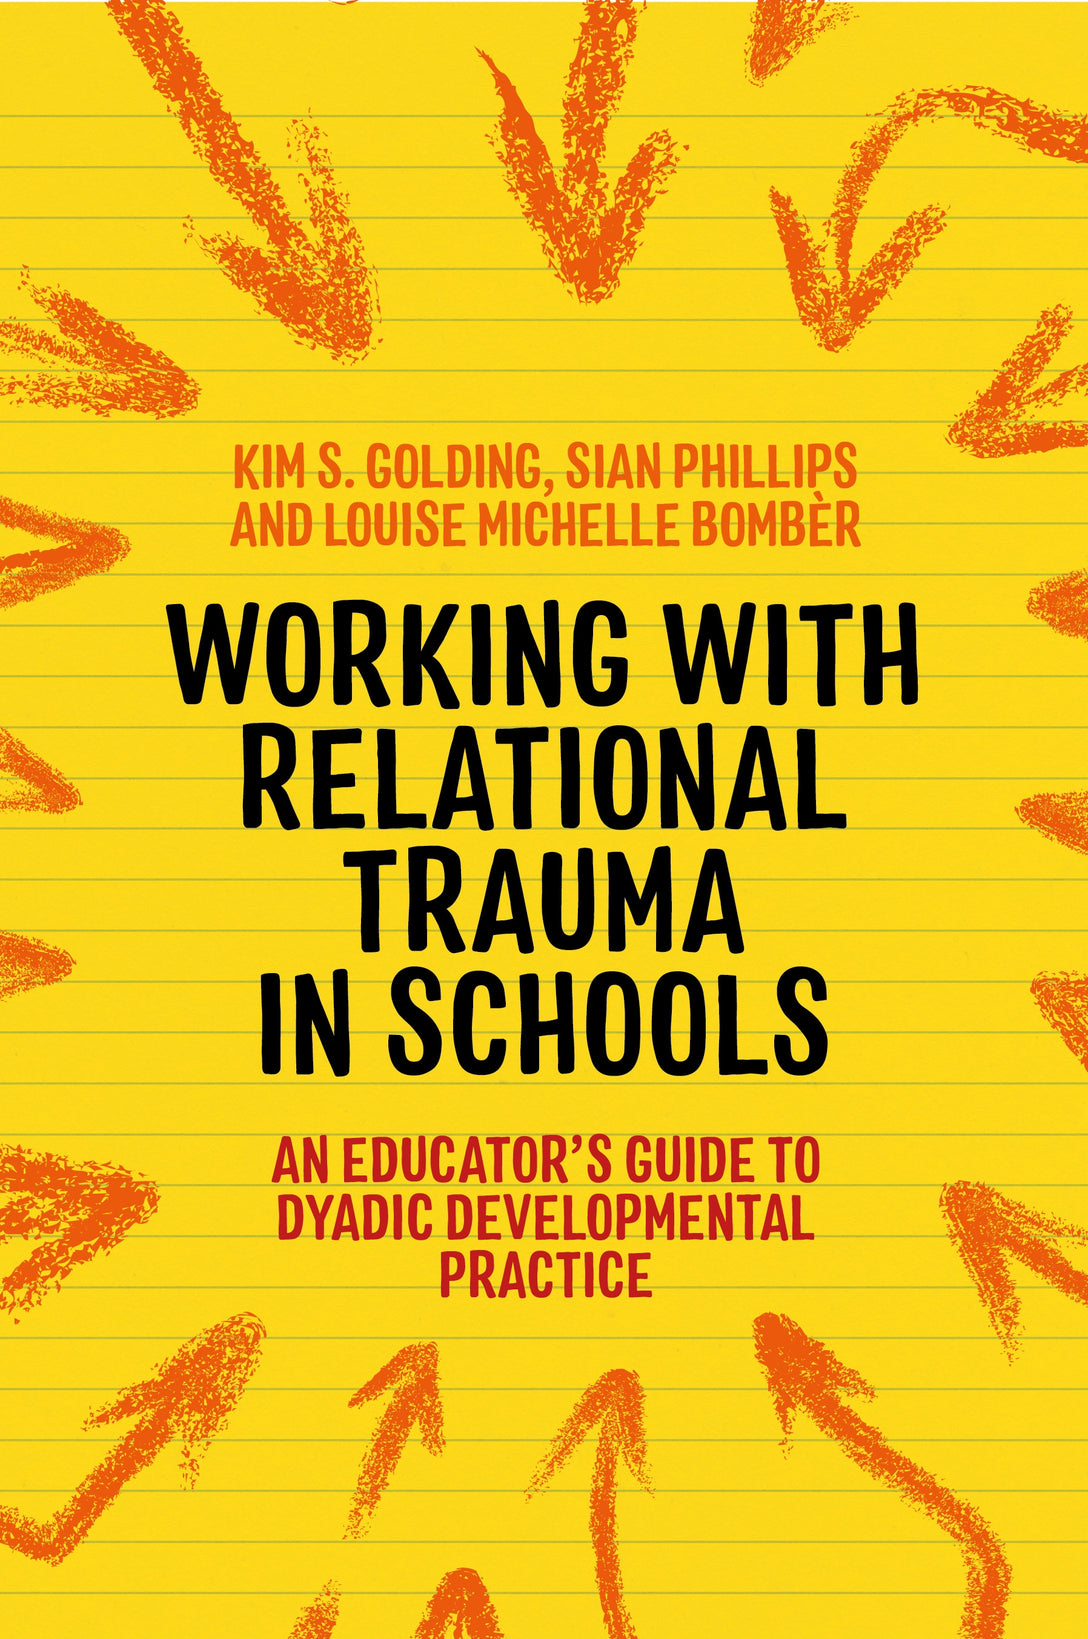 Working with Relational Trauma in Schools by Louise Michelle Bombèr, Kim S. Golding, Sian Phillips, Dan Hughes